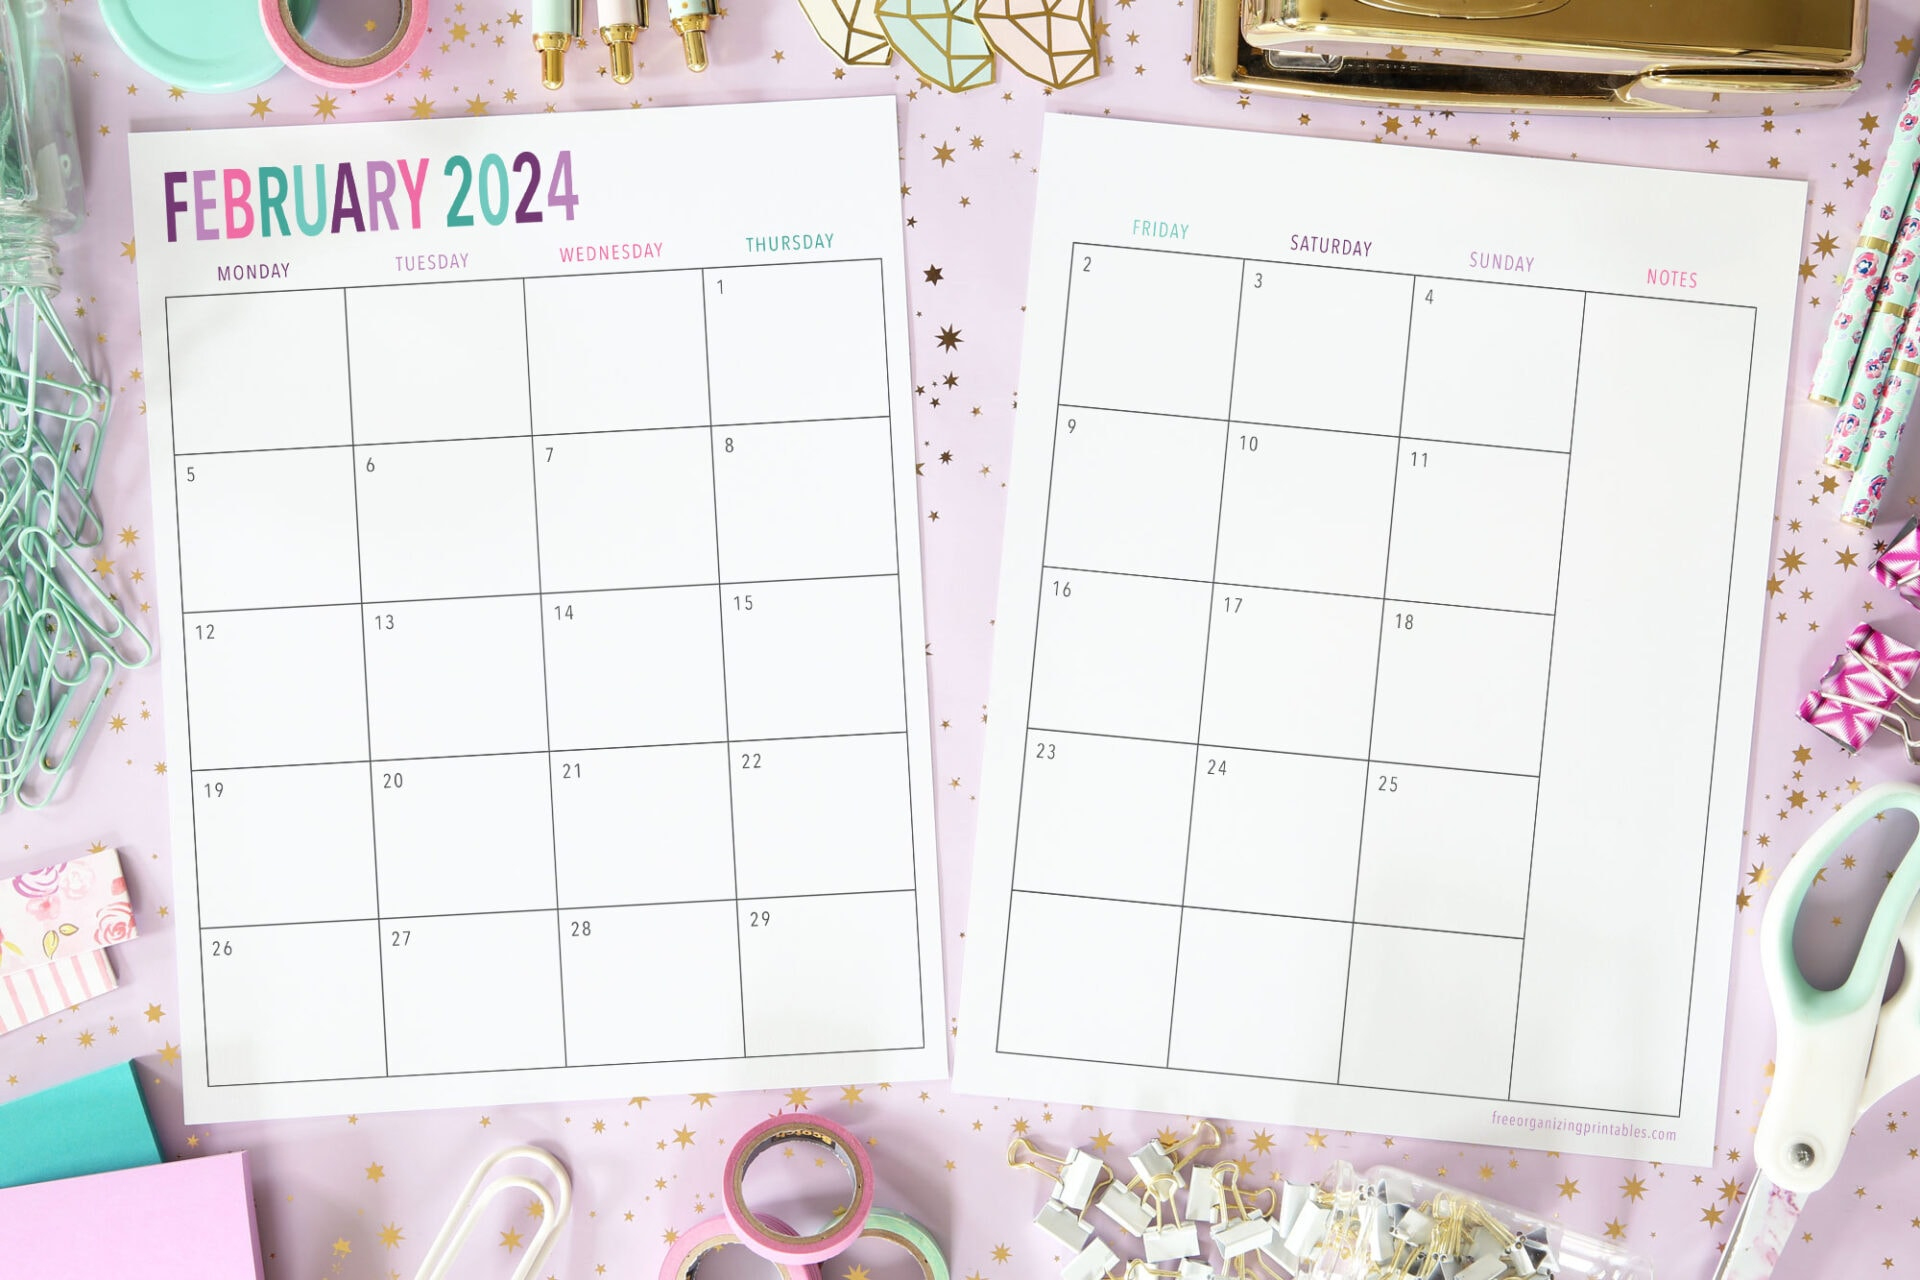 Free Printable 2 Page Blank Monthly Calendar 2024 | Free Printable Calendar 2024 Two Months Per Page